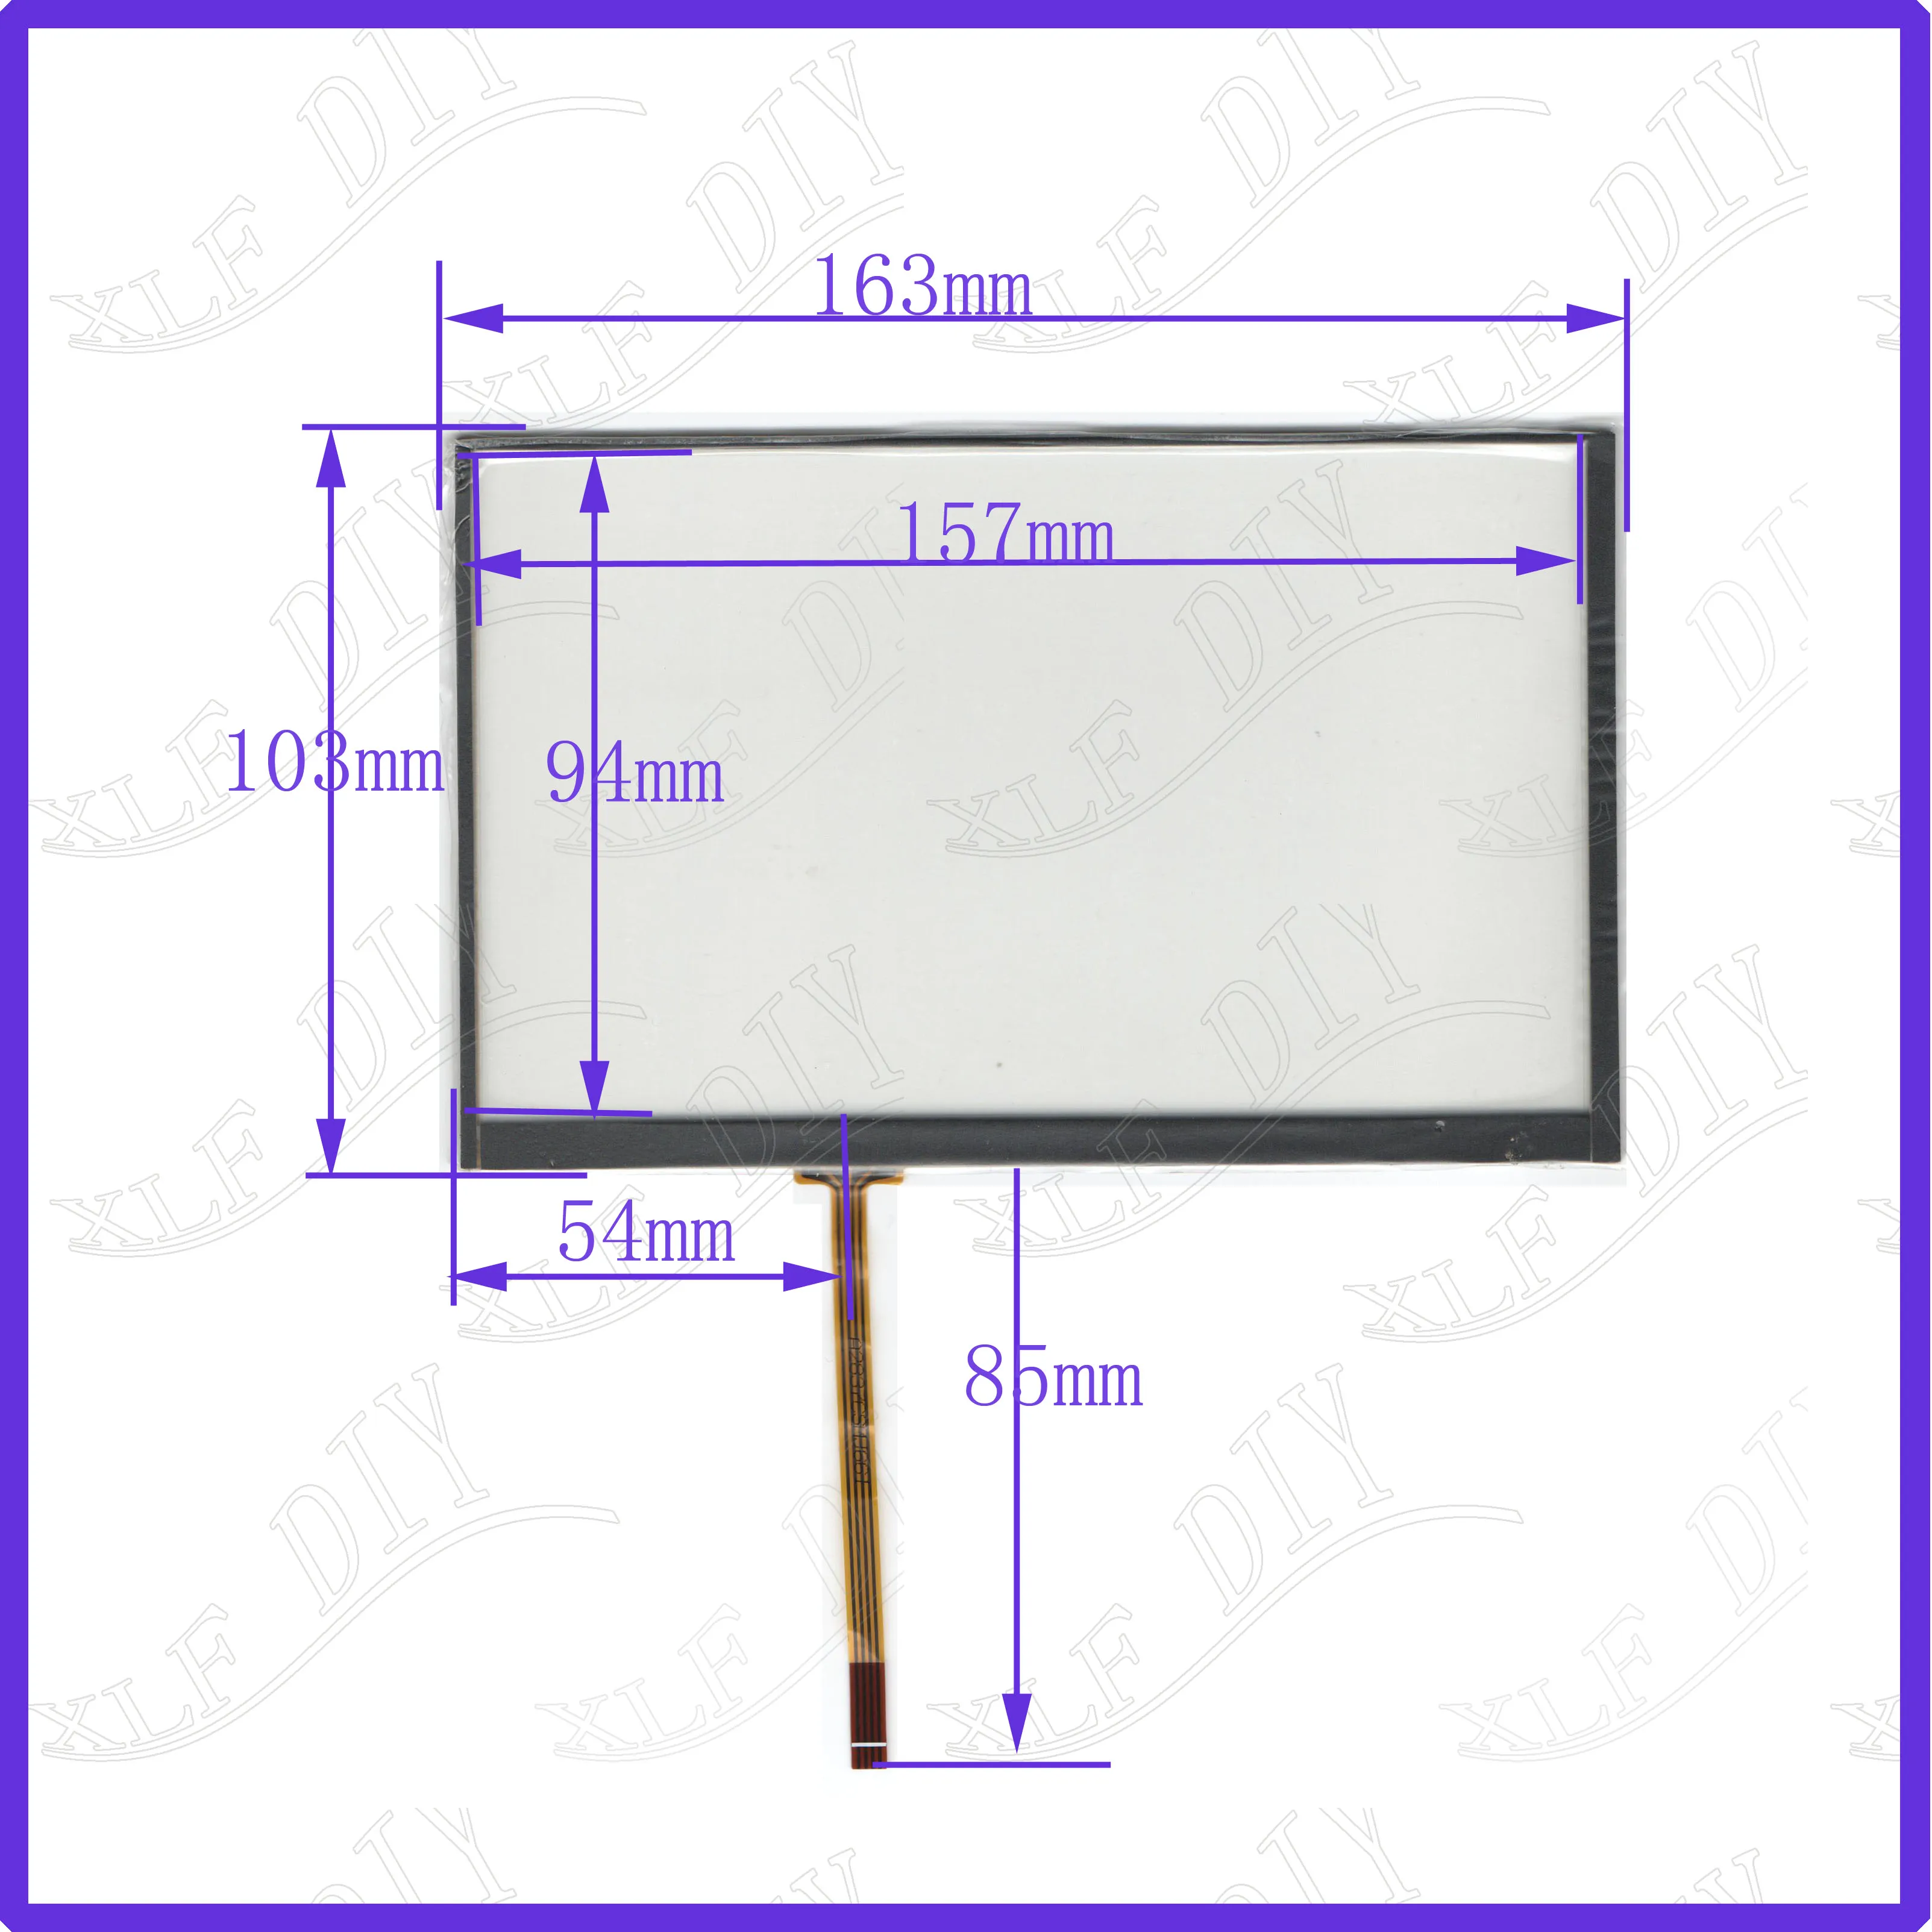 

wholesale AI 2837 163*103mm 7inch 4lines resistance screen 163mm*103mm for GPS CAR this is compatible for Car Rideo